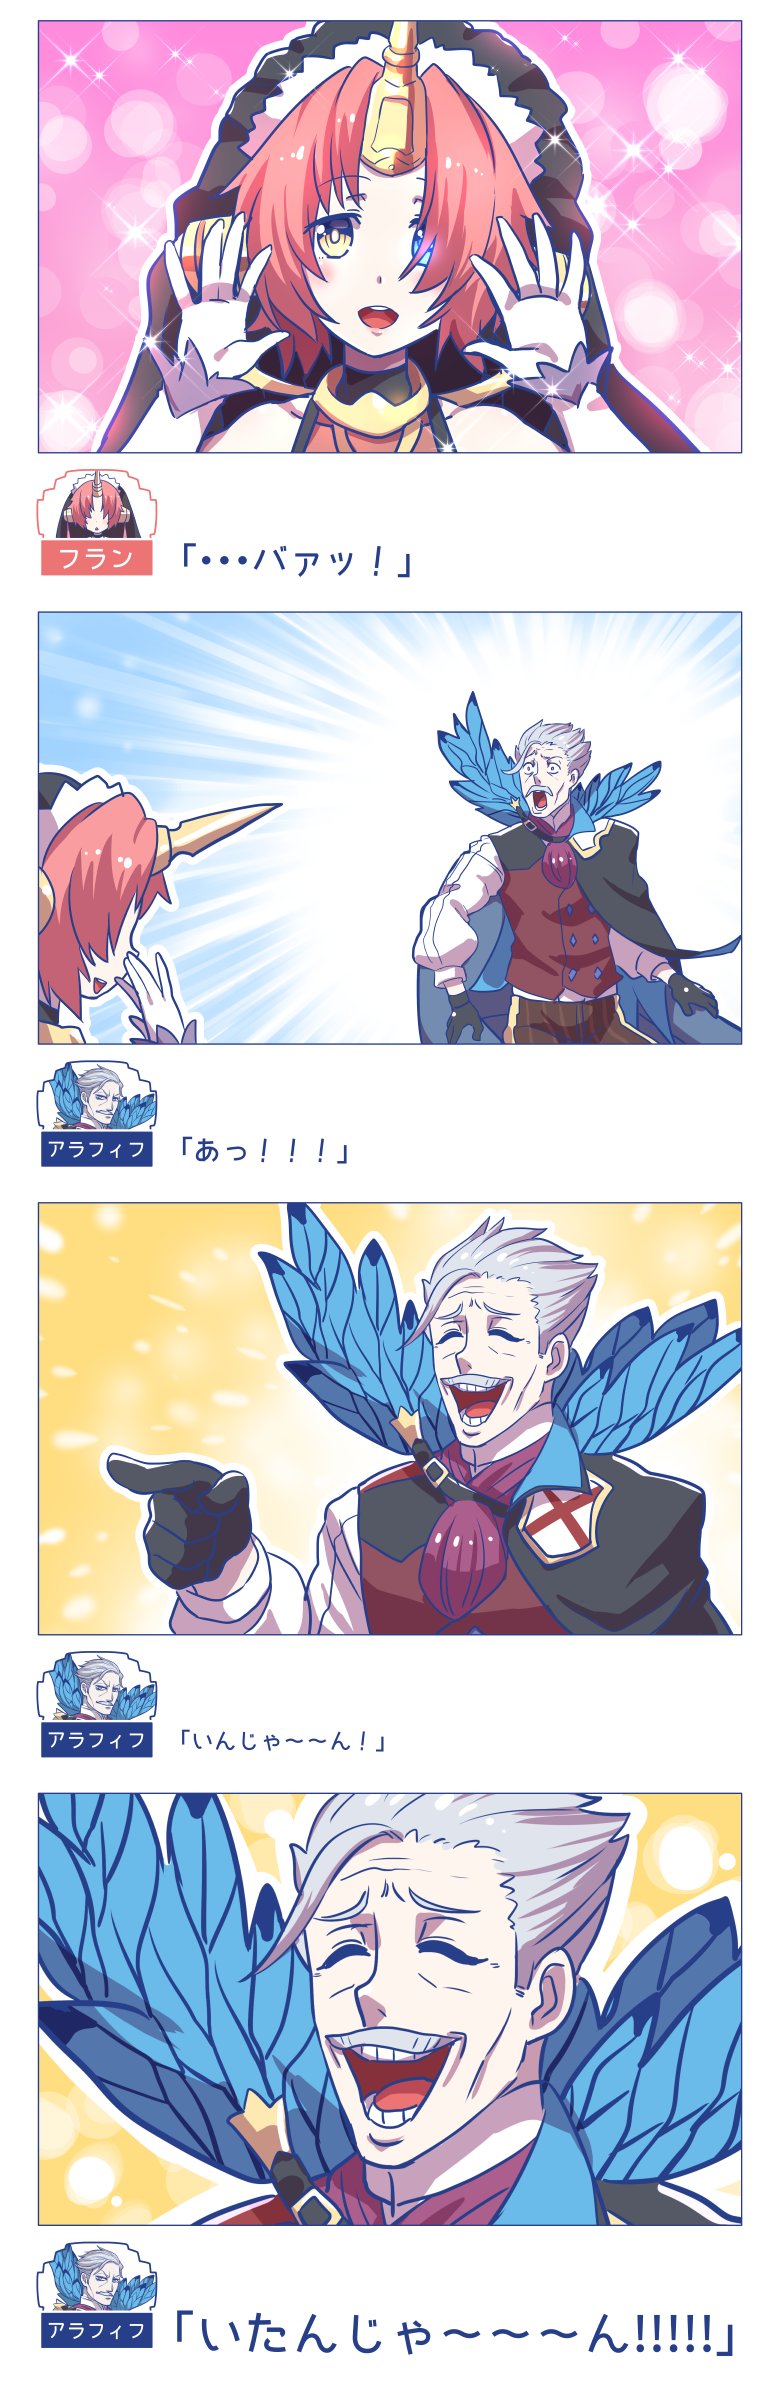 1boy 1girl absurdres berserker_of_black blue_eyes cape closed_eyes comic covering_eyes facial_hair fate/grand_order fate_(series) feathers gloves heterochromia highres horn james_moriarty_(fate/grand_order) mustache open_mouth pink_hair tomoyohi translation_request white_hair yellow_eyes